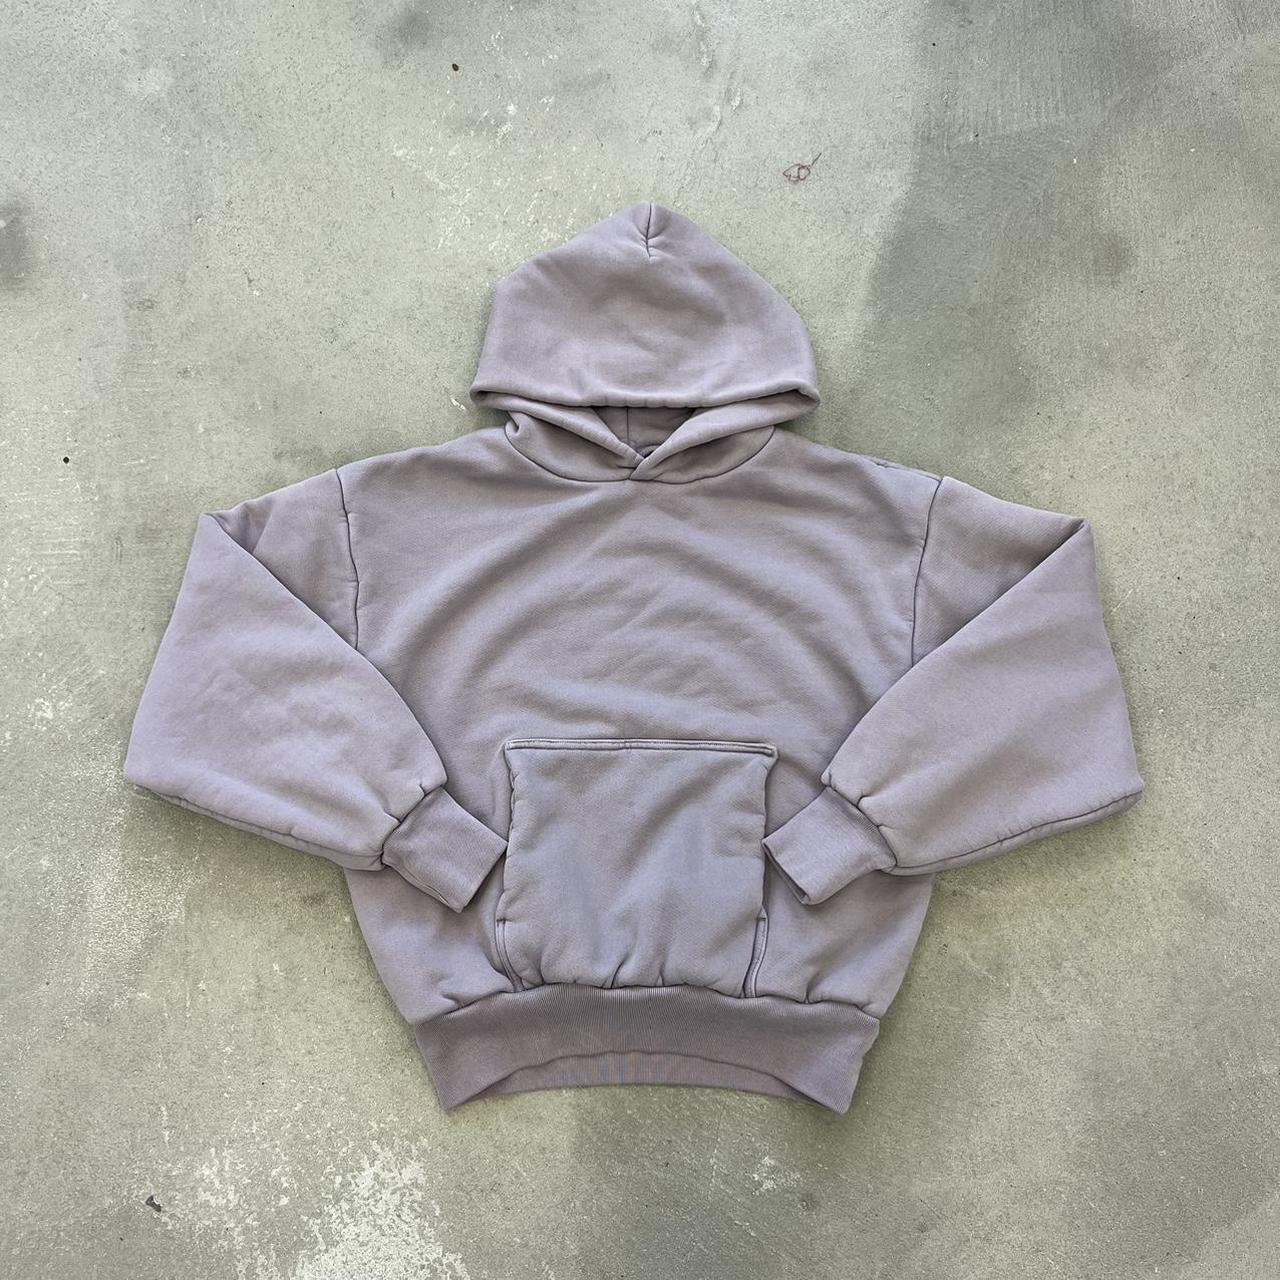 LAABLK727 - SAMPLE DUSTY PIG DOUBLE LAYERED HOODED... - Depop